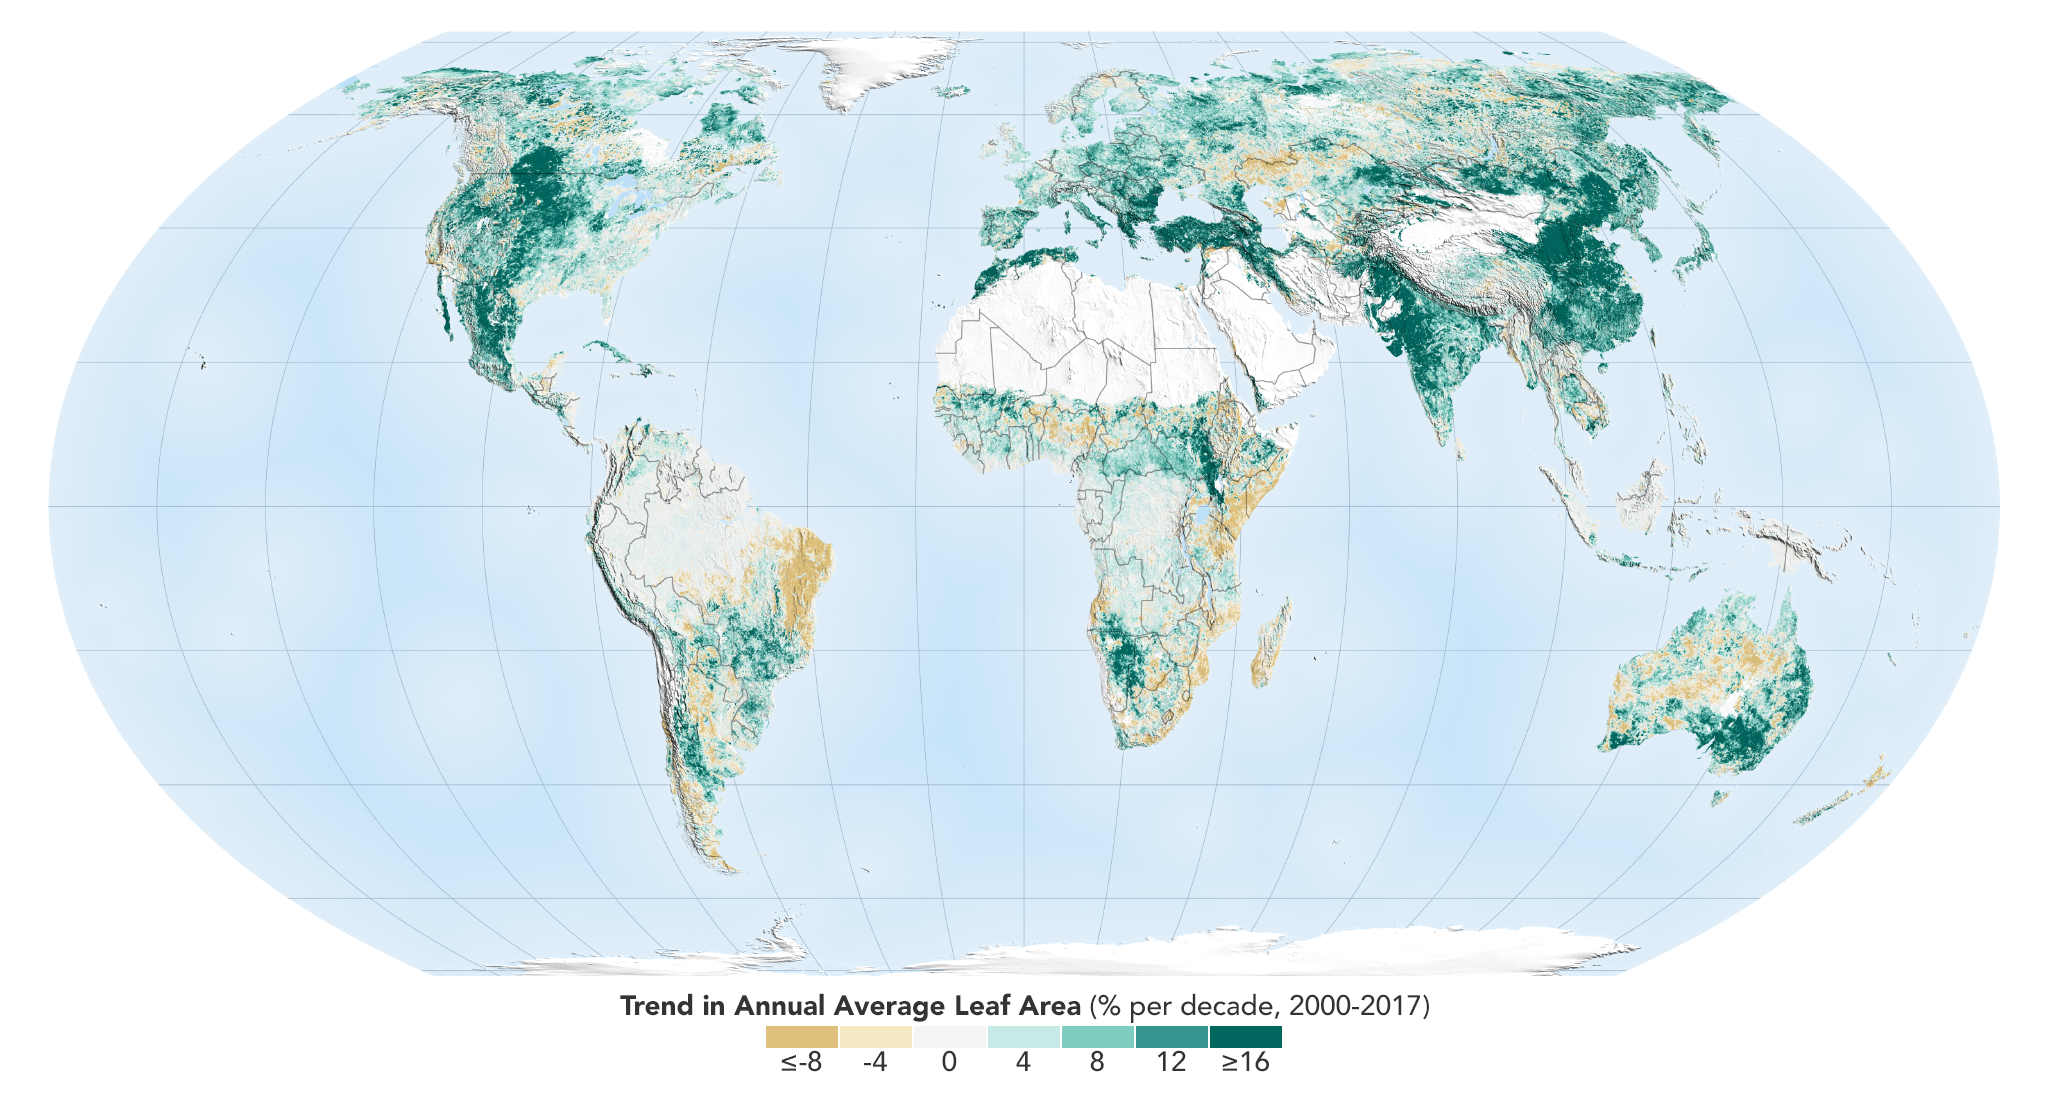 A world map showing the trend in annual average leaf area, in percent per decade (2000-2017)